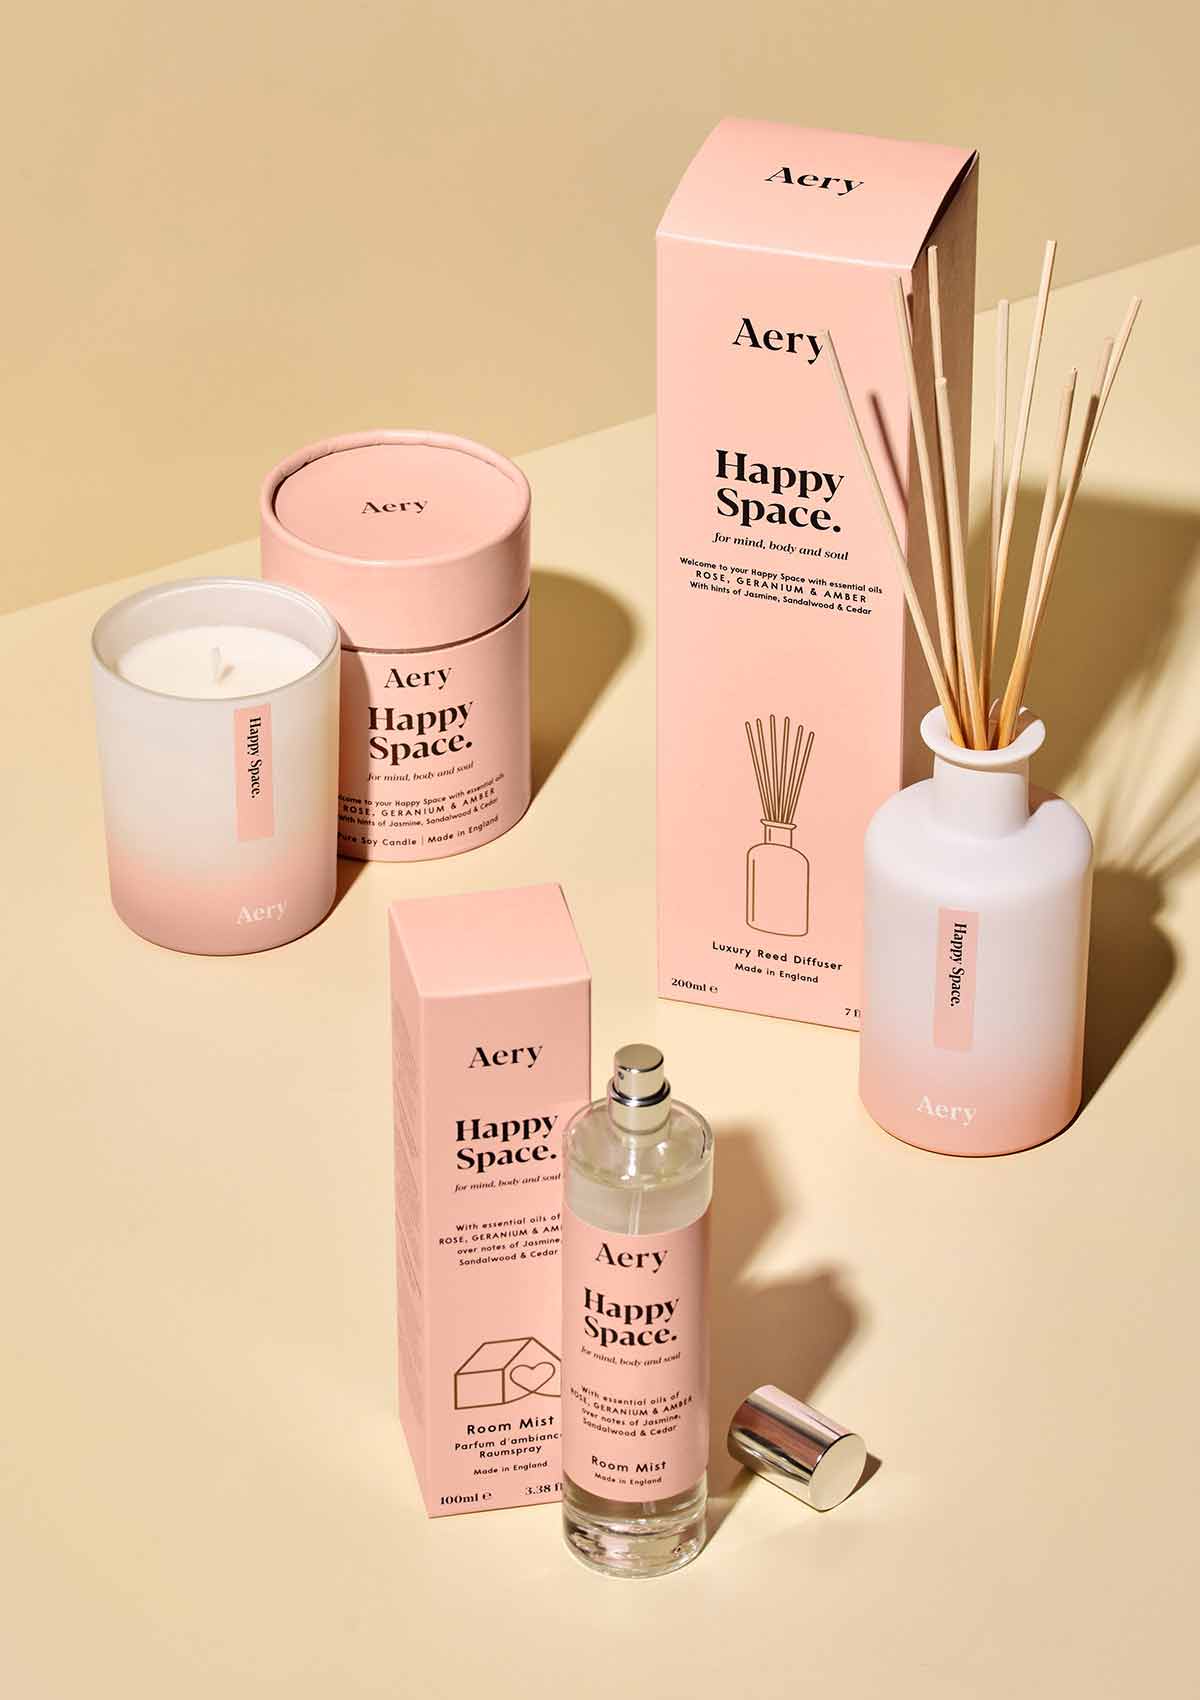 a selection of aery living happy space aromatherapy products. A room spray, reed diffuser and scented candle all displayed next to their product packaging